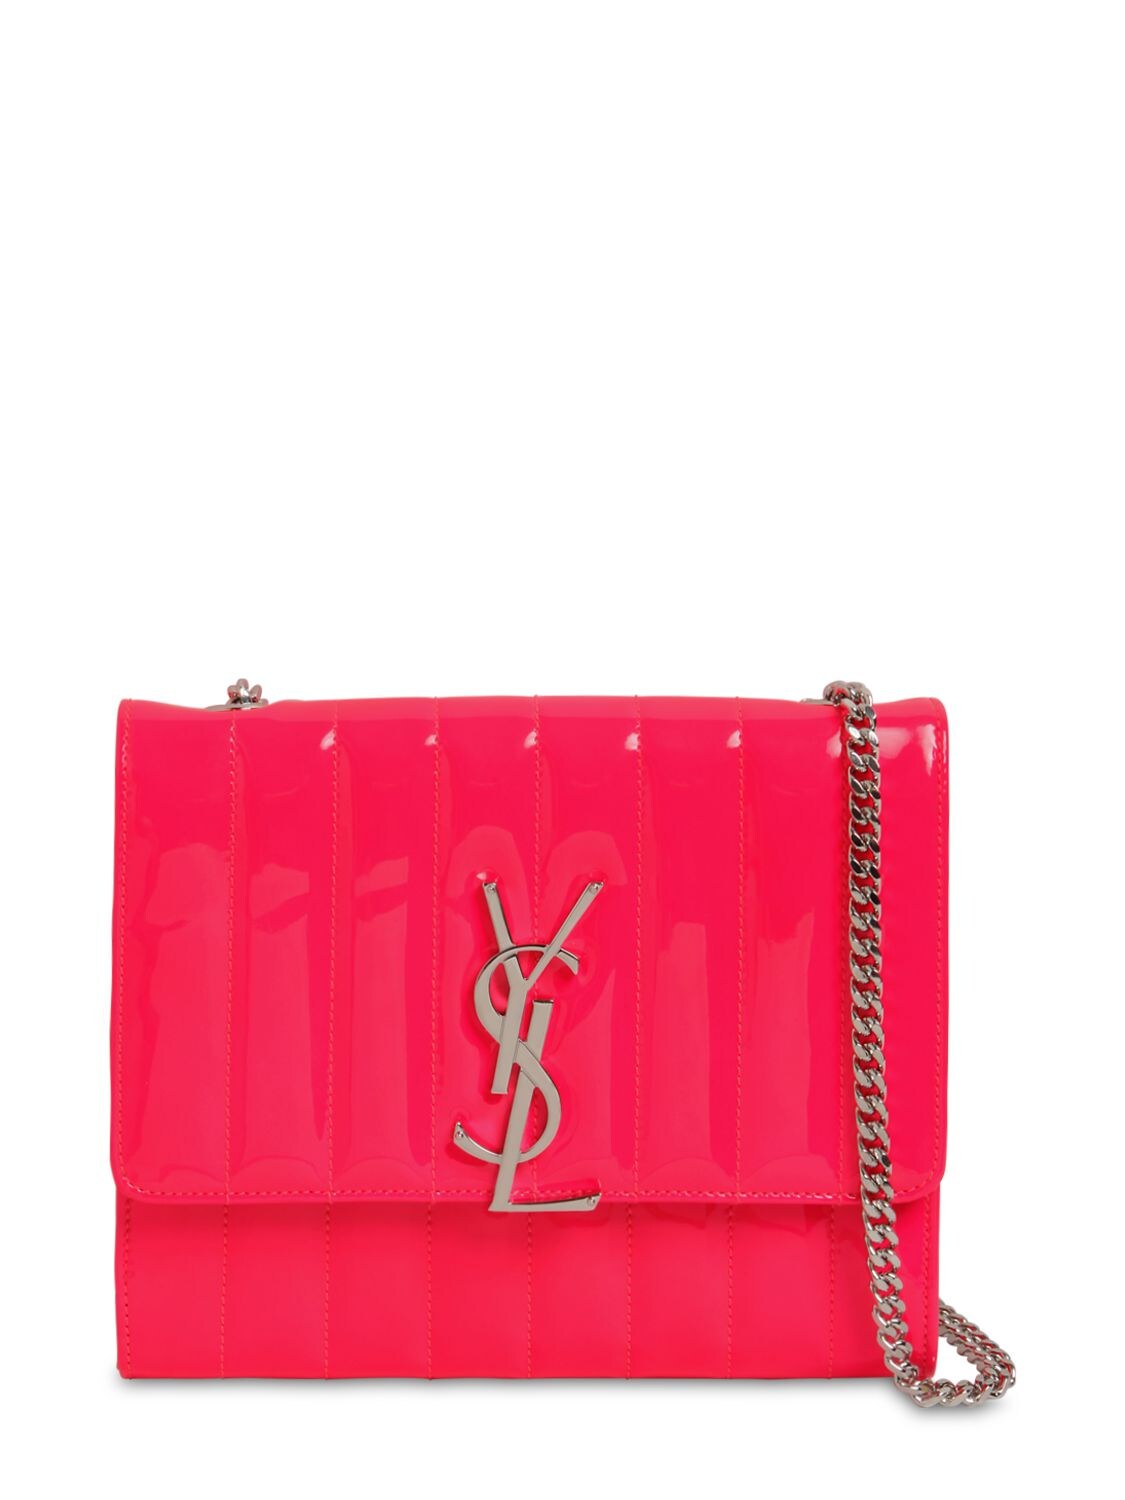 Saint Laurent Viki Quilted Leather Chain Wallet Bag In Neon Pink